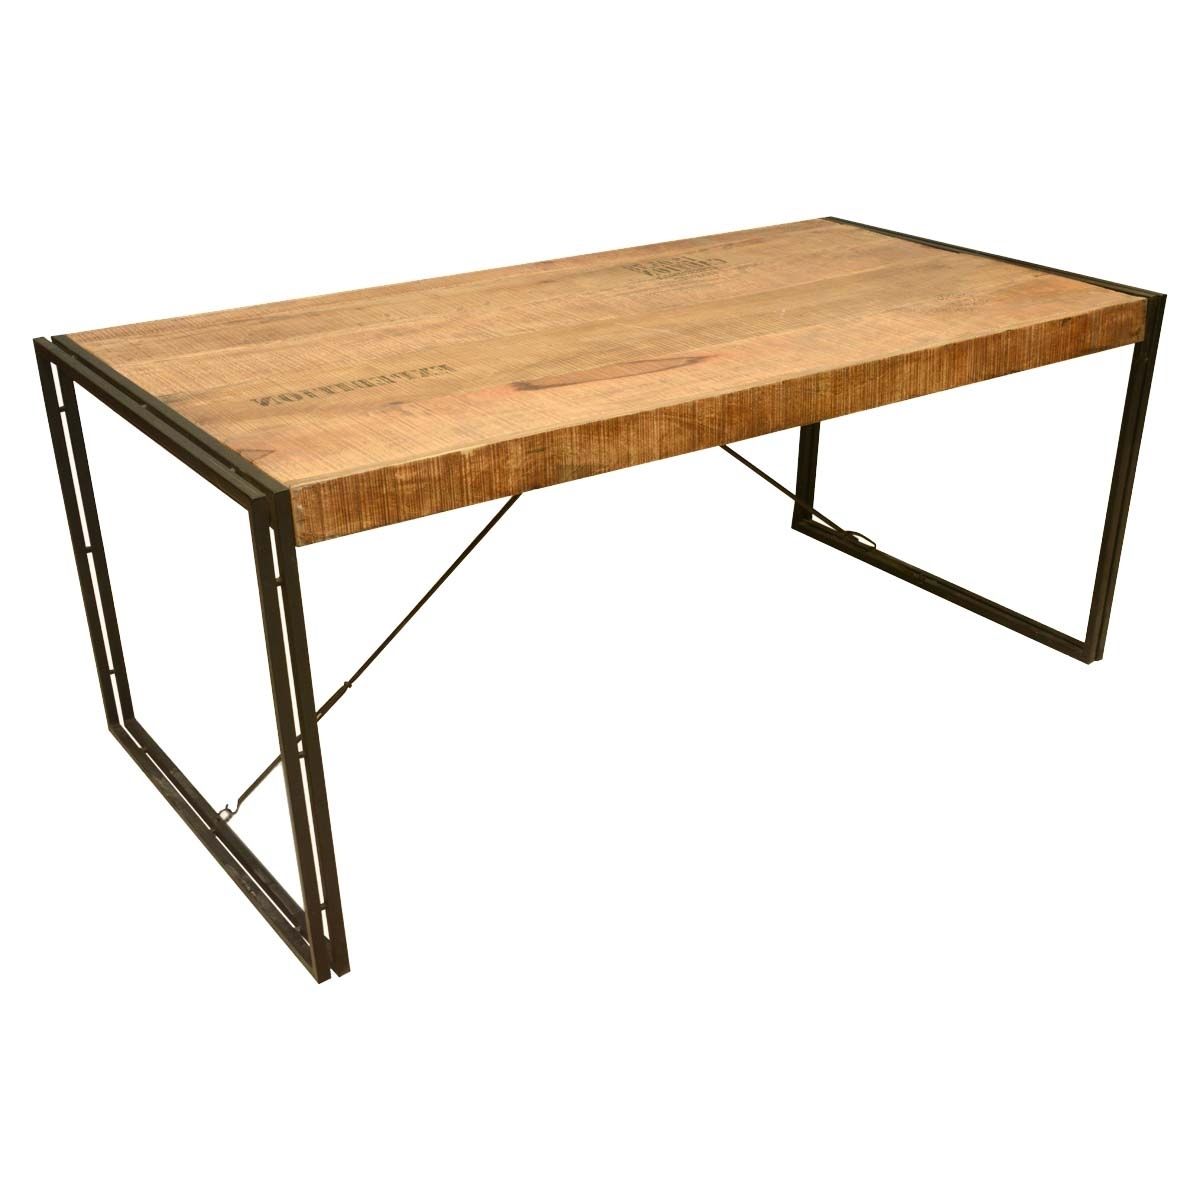 Large Rustic Industrial Style Mango Wood And Iron Dining Table With Regard To Latest Mango Wood/iron Dining Tables (View 5 of 25)